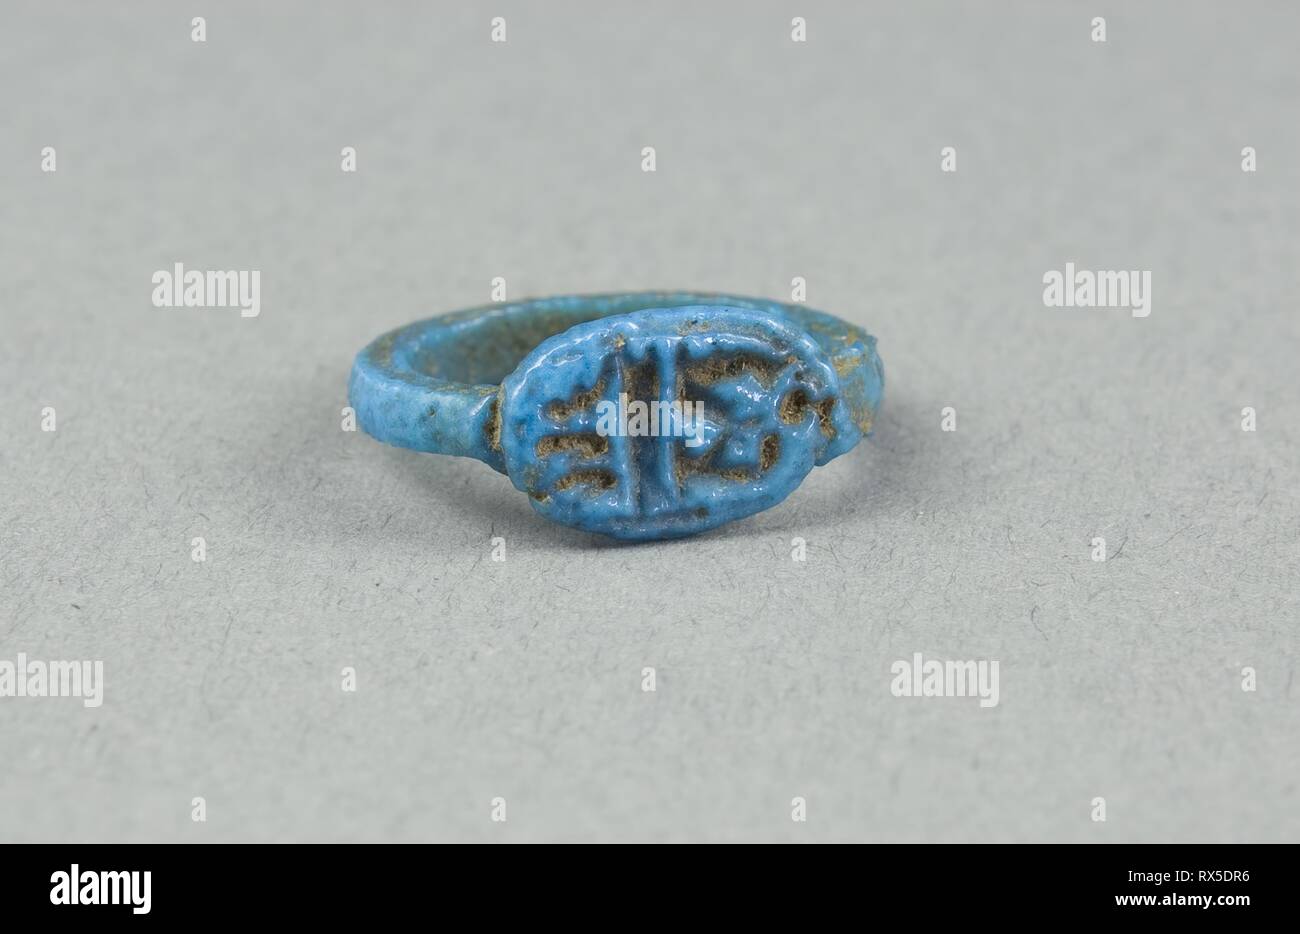 Ring: Rameses-mry-Amun?. Egyptian. Date: 1147 BC-1143 BC. Dimensions: W. 0.8 cm (5/16 in.); diam. 2.1 cm (13/16 in.). Faience. Origin: Egypt. Museum: The Chicago Art Institute. Author: Ancient Egyptian. Stock Photo